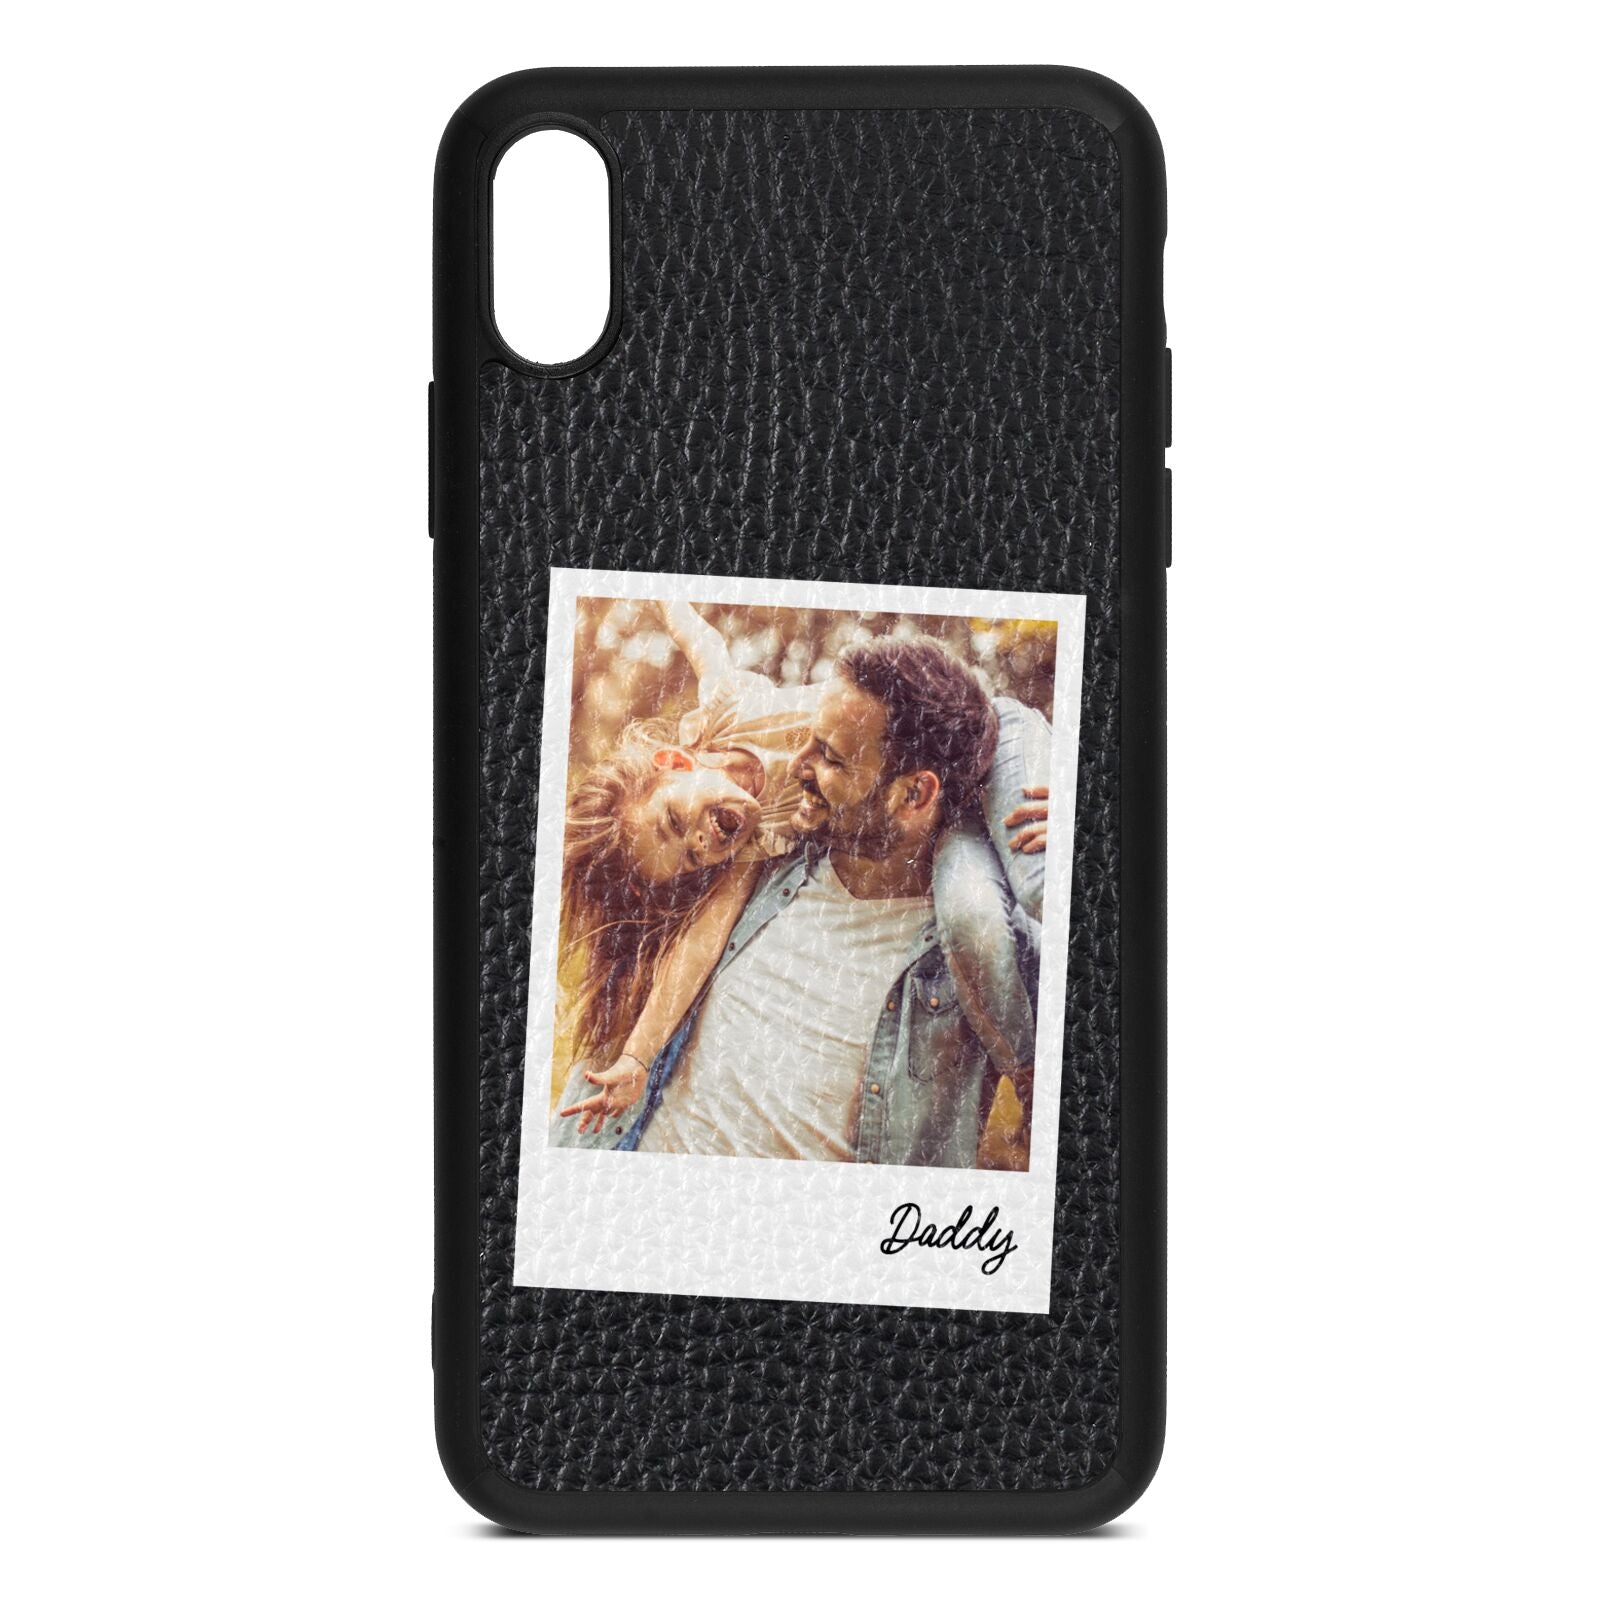 Fathers Day Photo Black Pebble Leather iPhone Xs Max Case